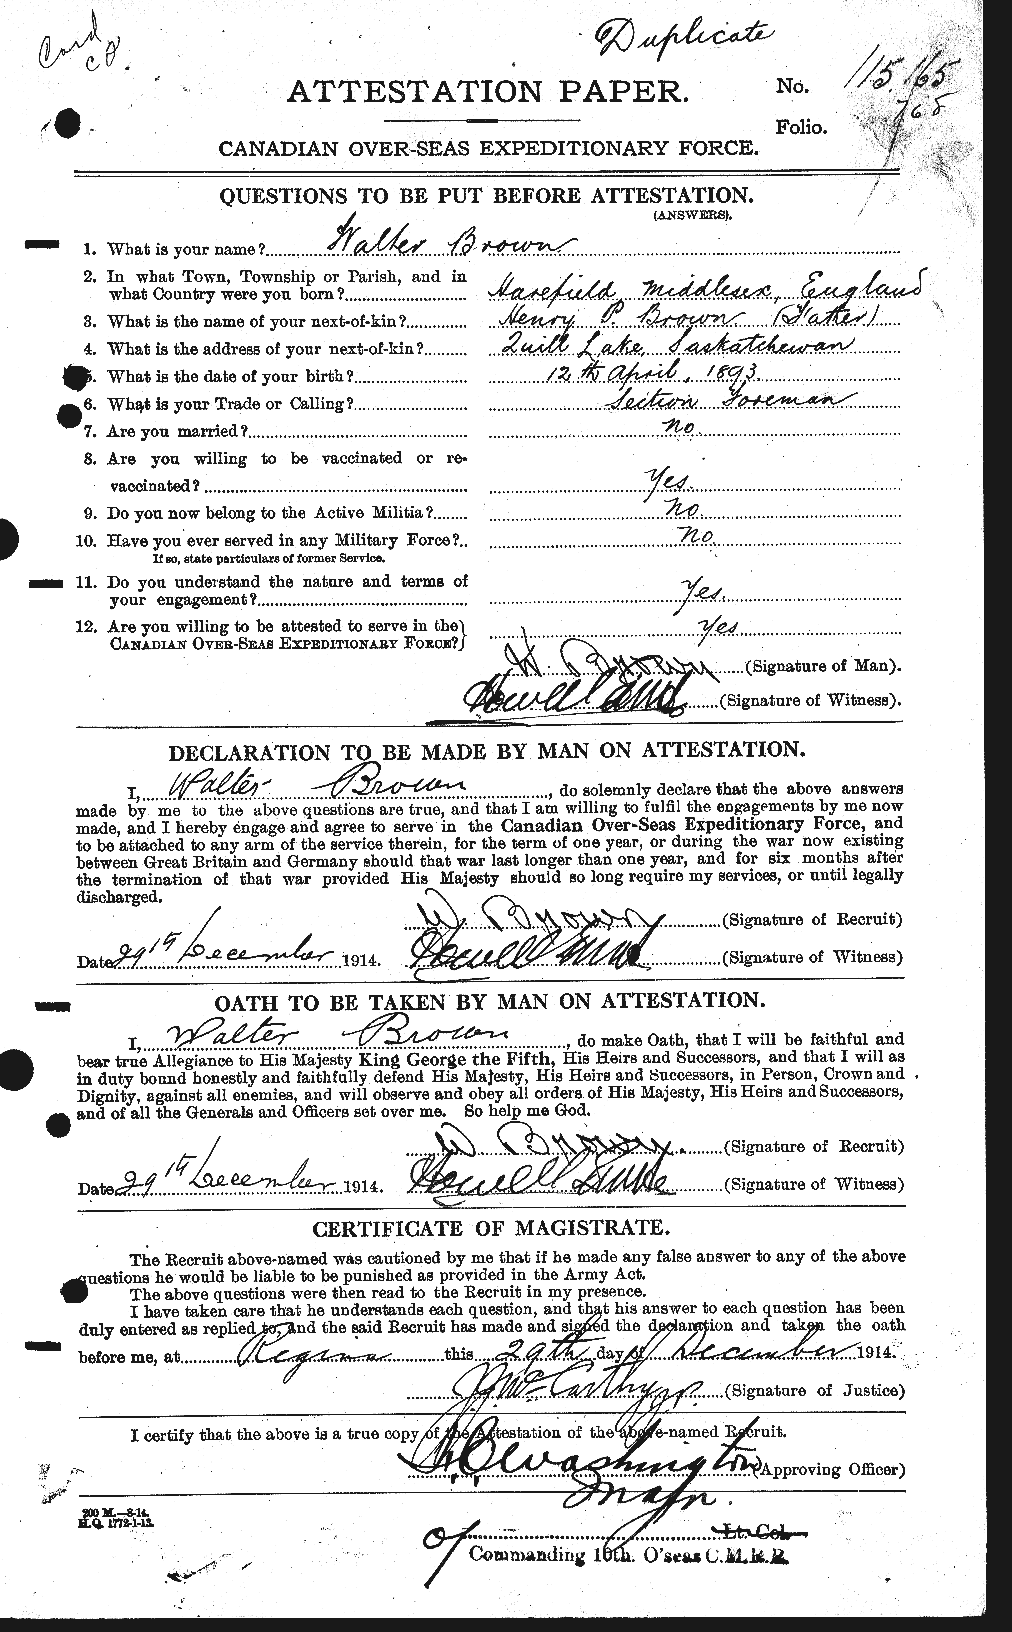 Personnel Records of the First World War - CEF 266648a